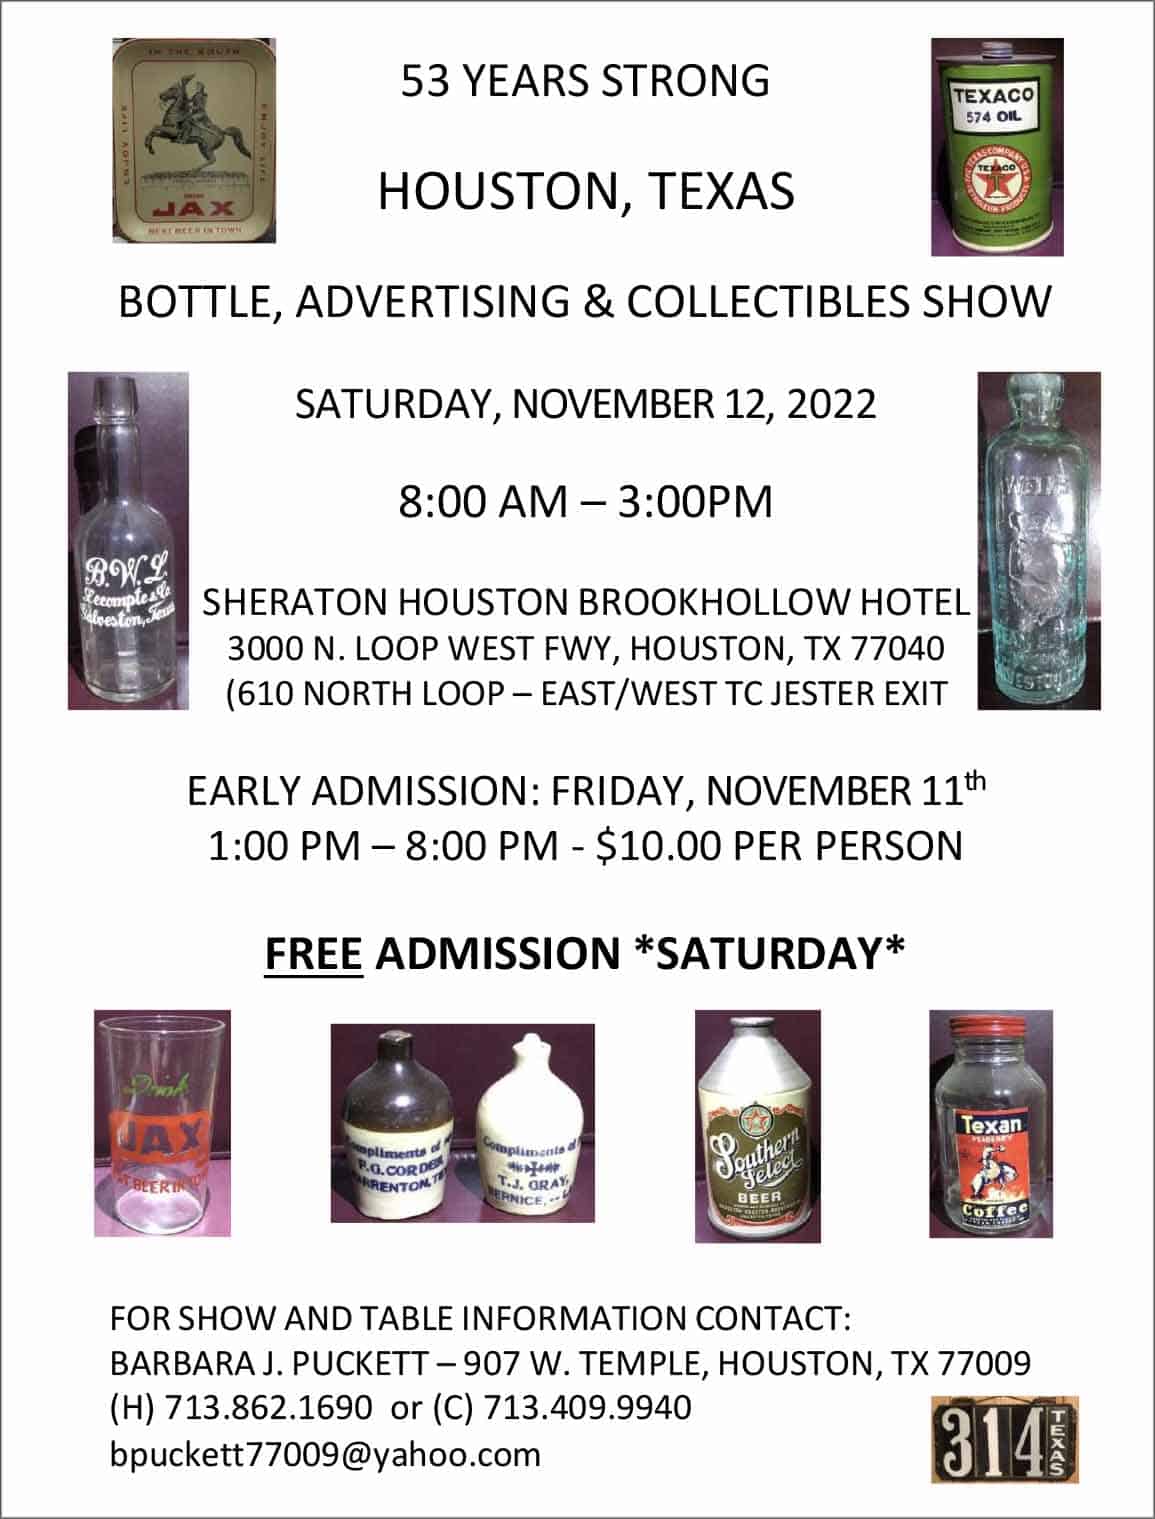 53 Years Strong! The Houston Bottle, Advertising & Collectibles Show @ Sheraton Houston Brookhollow Hotel